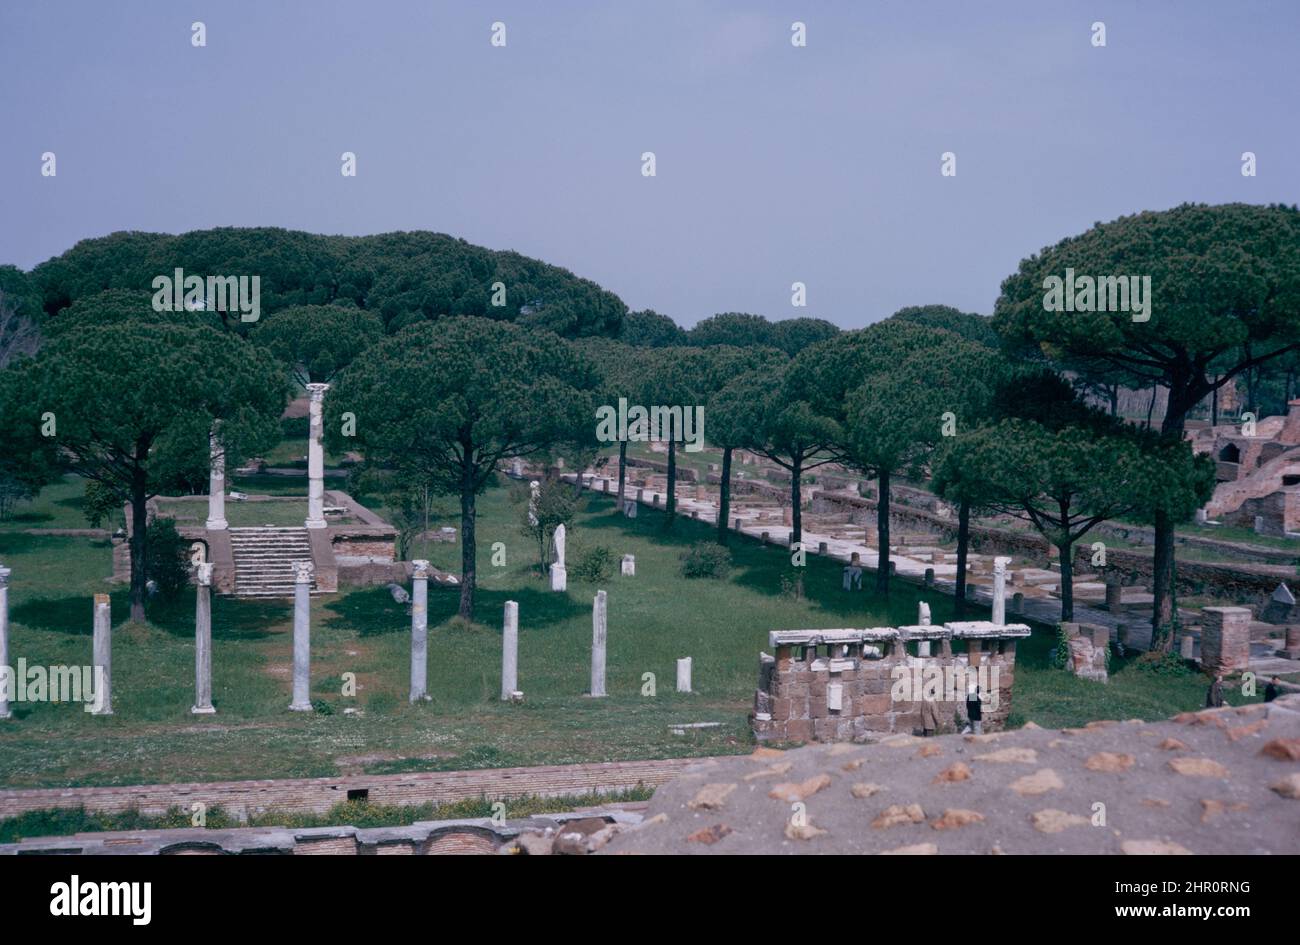 Ostia Antica - large archaeological site in progress, location of the harbour city of ancient Rome.  Piazzale delle Corporazioni (Square of the Corporations) from Temple of Ceres.  Archival scan from a slide. April 1970. Stock Photo